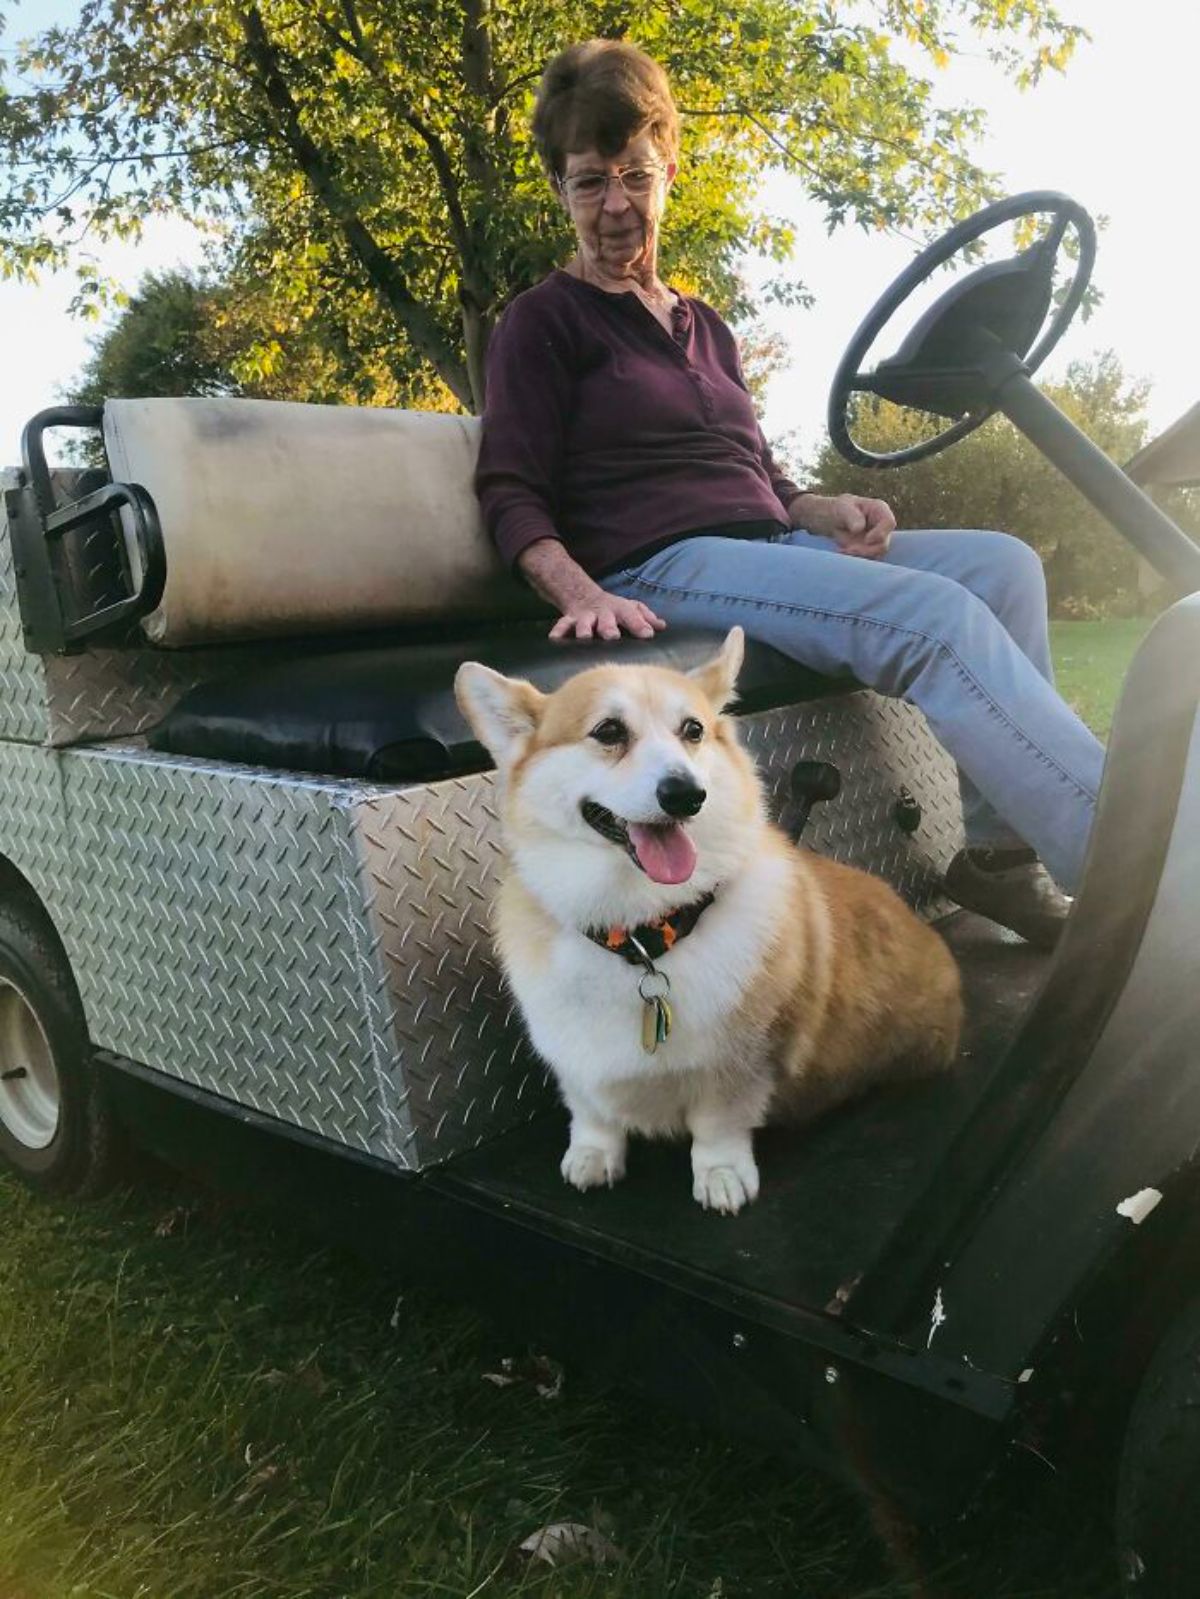 brown and white corgi sitting on the floor of a utility cart next to an old woman